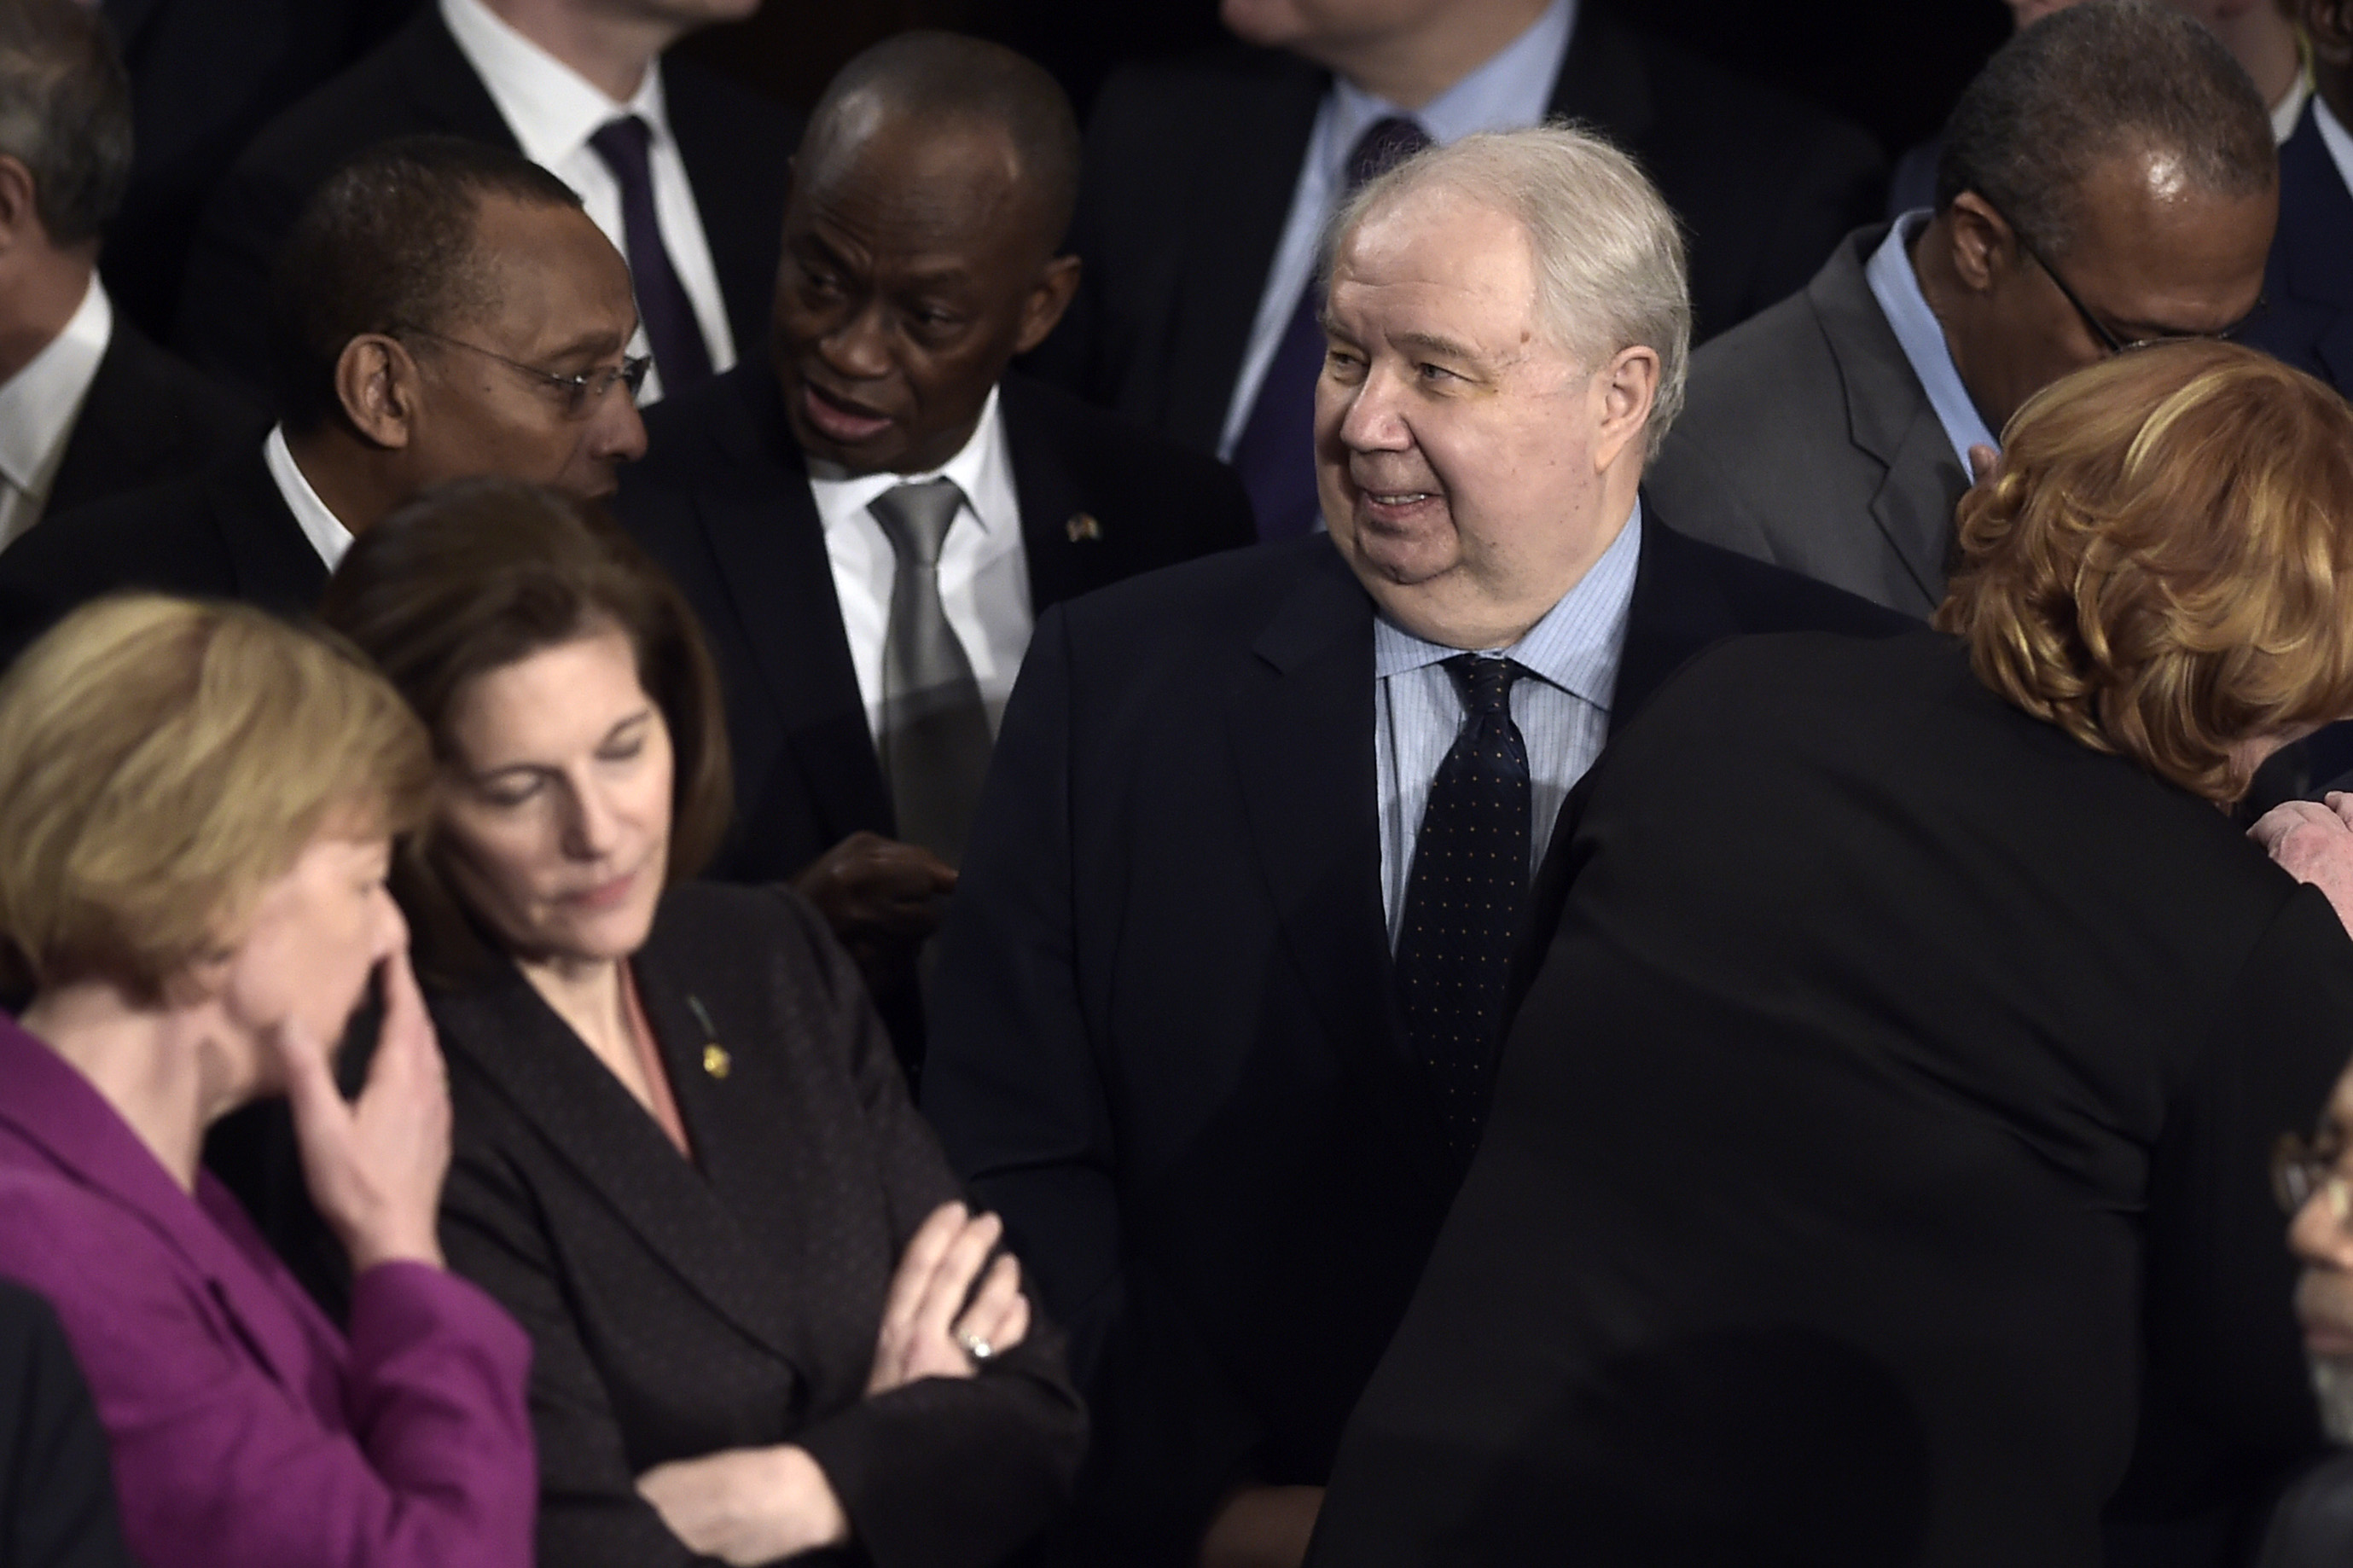 Spotted: Sergey Kislyak at the biggest event in Washington this week.
